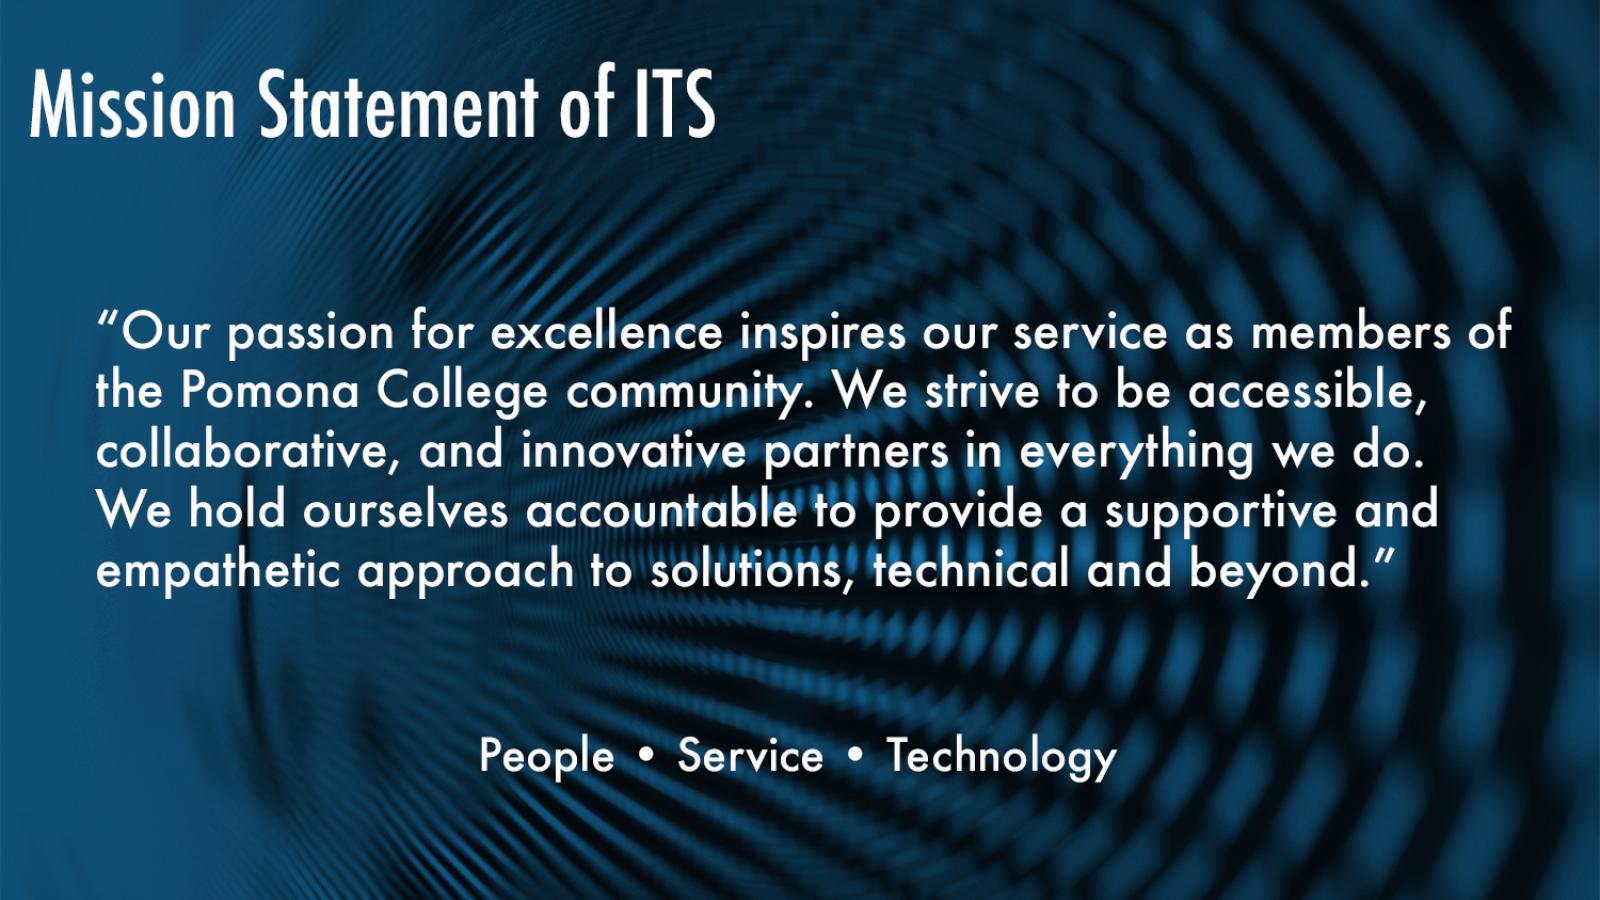 The ITS Mission Statement